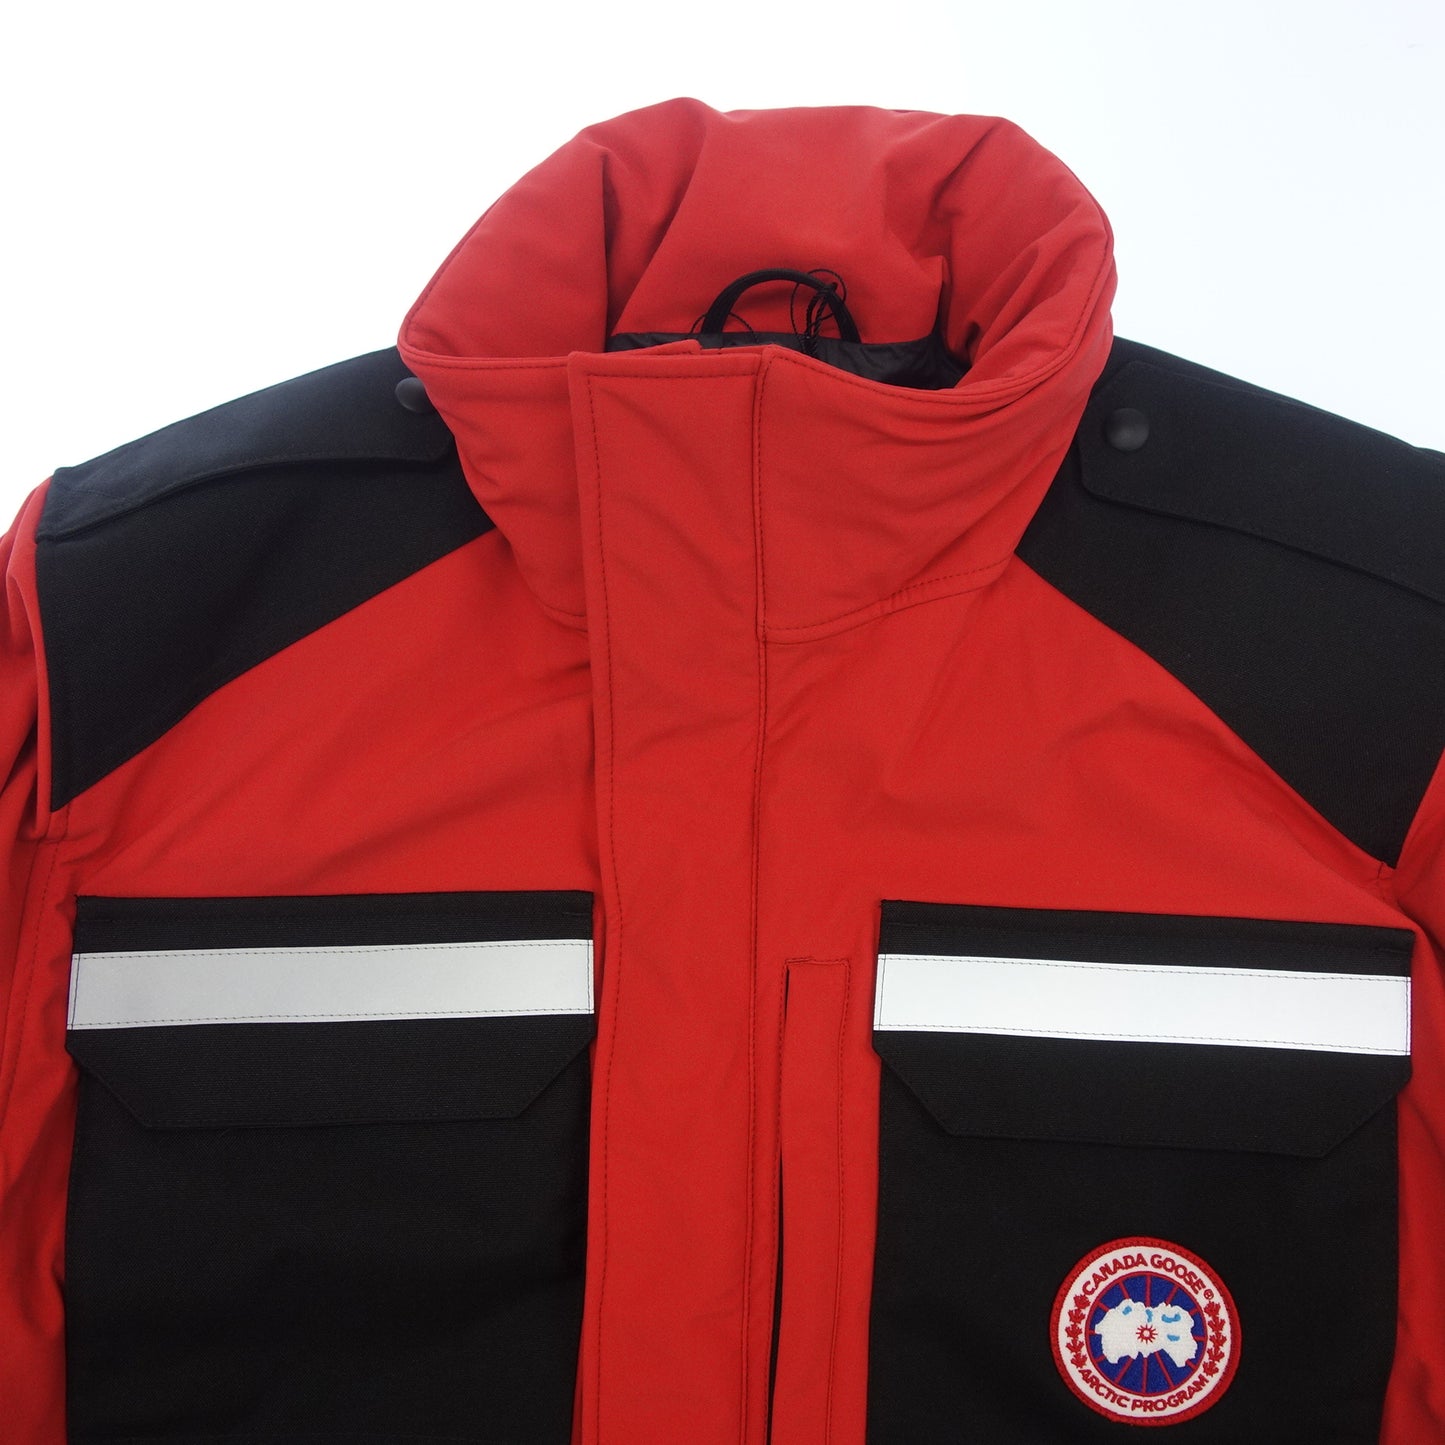 Canada Goose Jacket Photojournalist 2414M Men's L Red CANADAGOOSE [AFB16] [Used] 